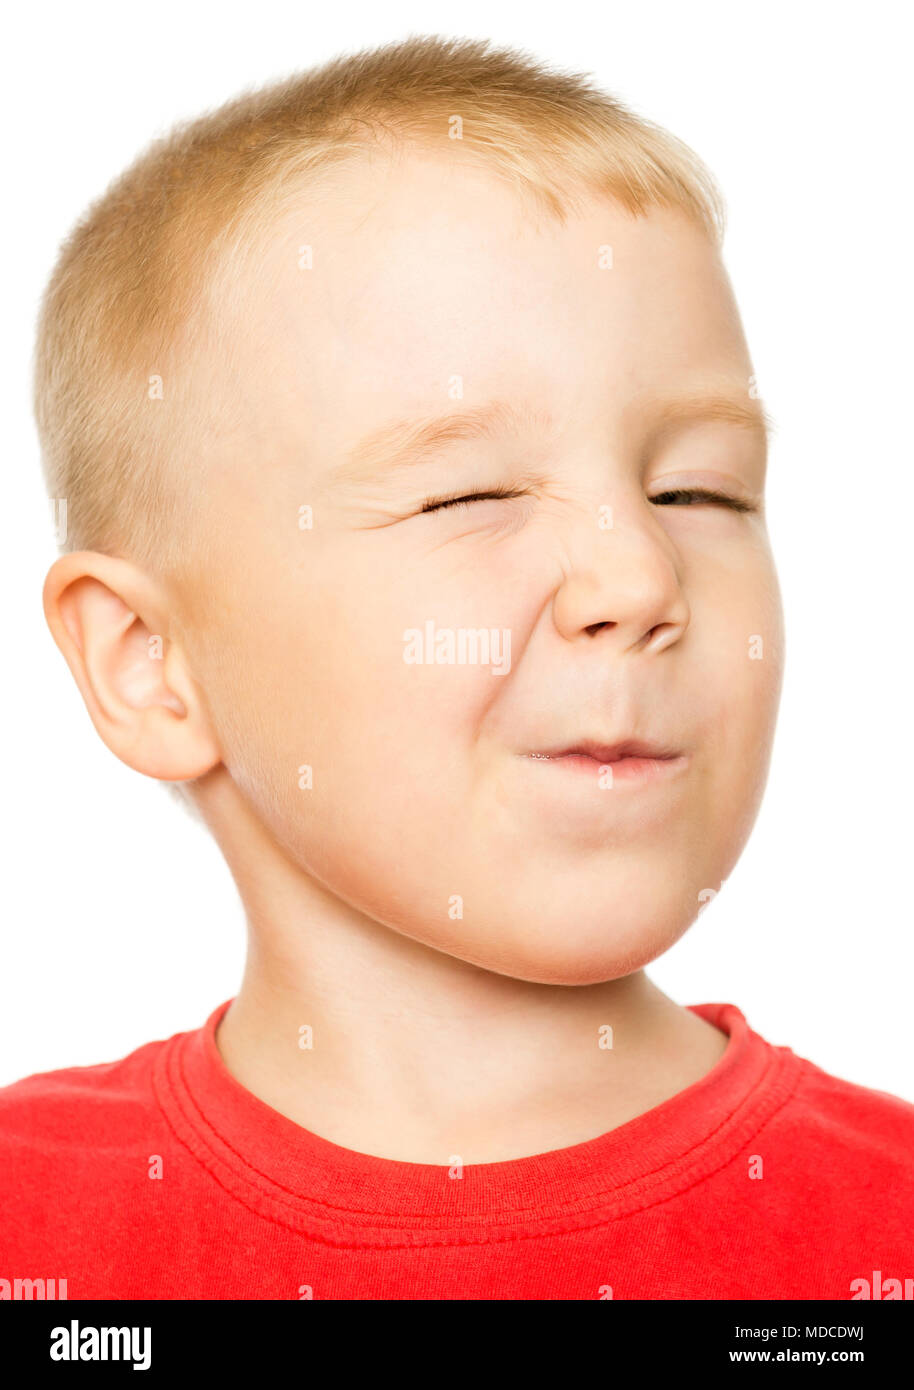 Four-Year-Old Boy making a Winking Face Stock Photo